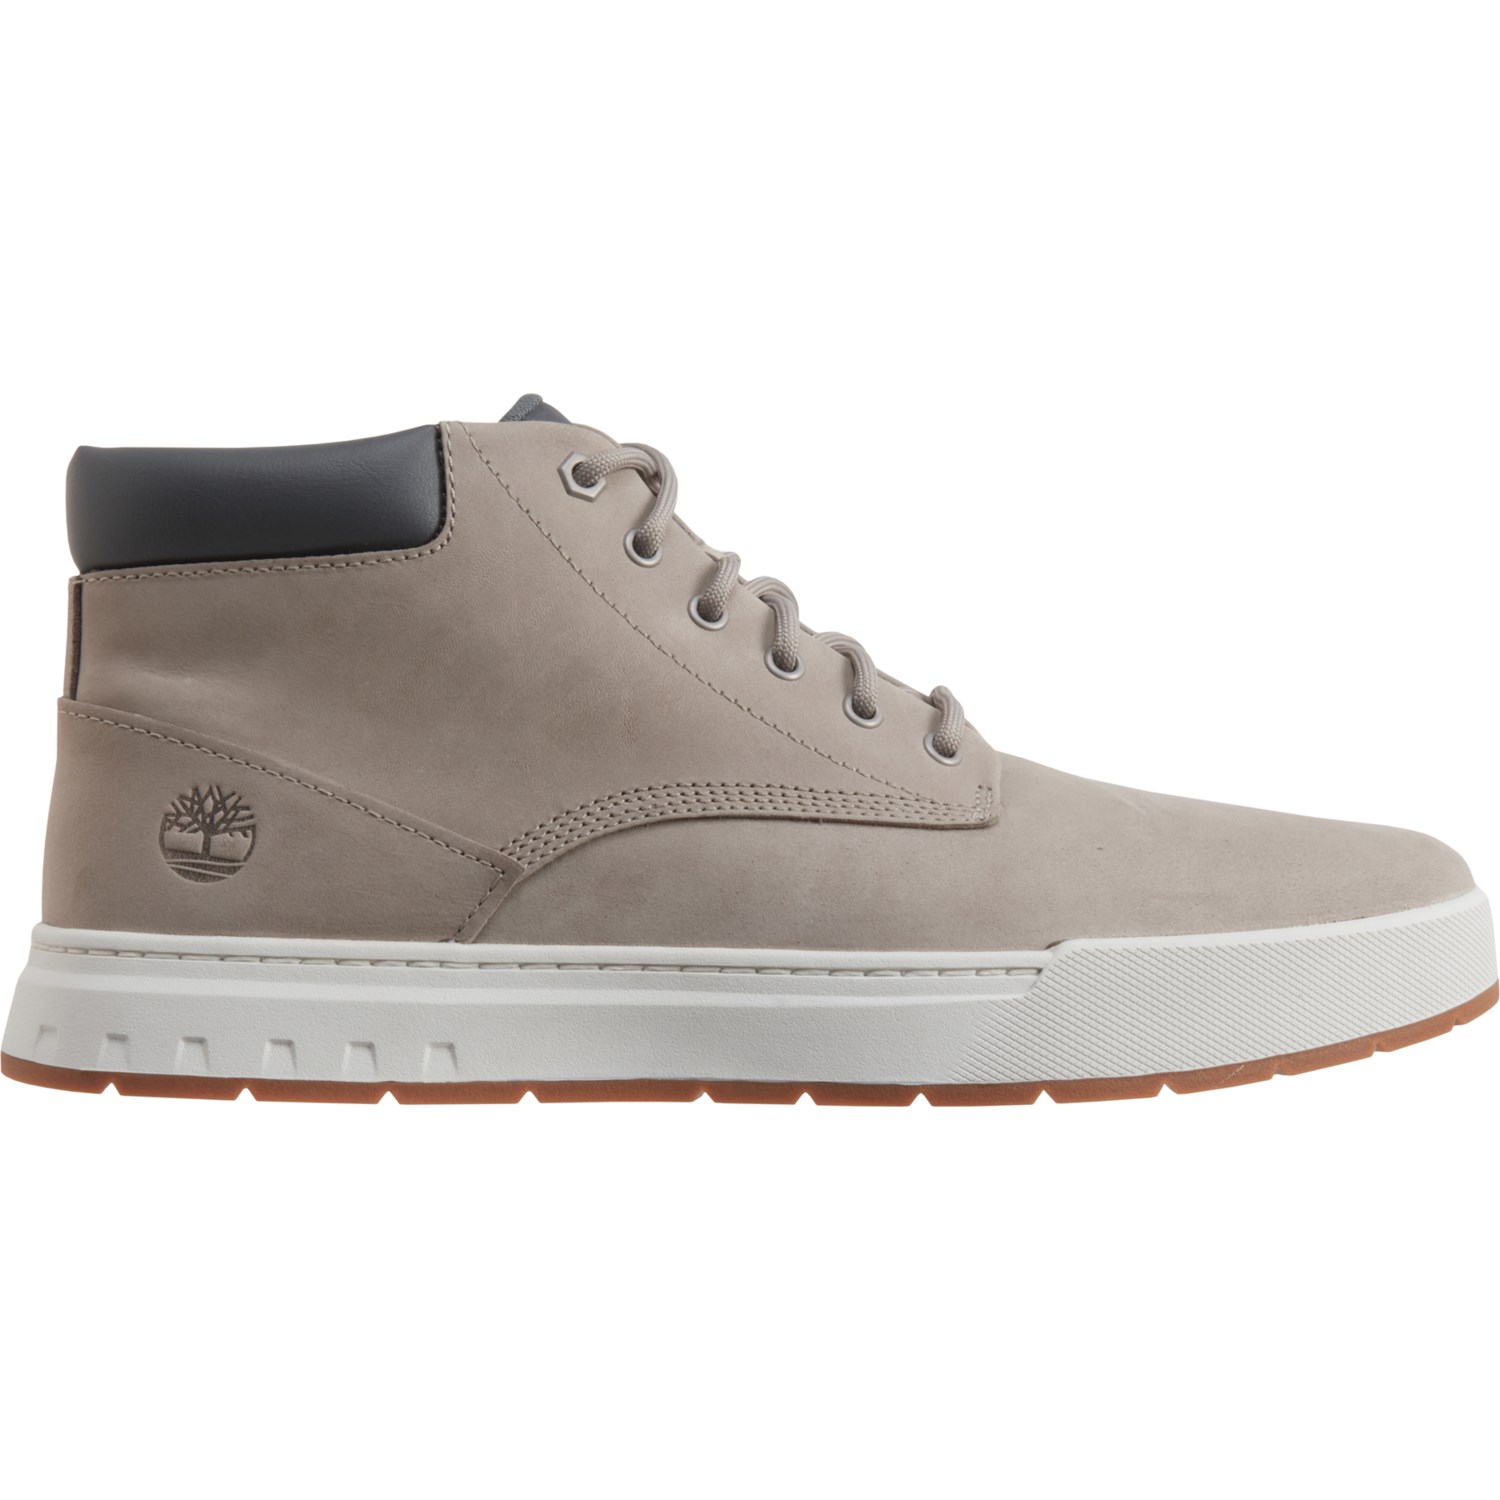 Timberland Maple Grove Mid Sneaker Boots (For Men) - Save 44%